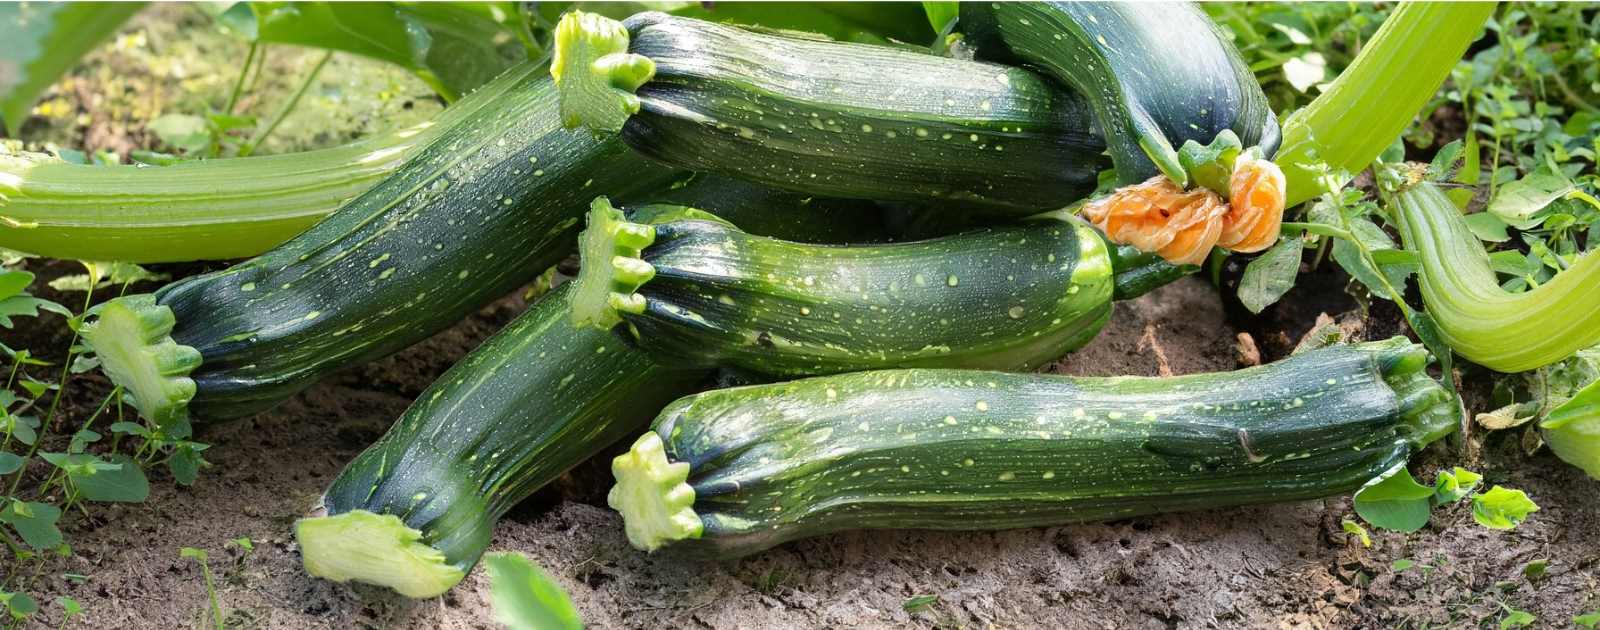 Is Zucchini a Melon or a Fruit